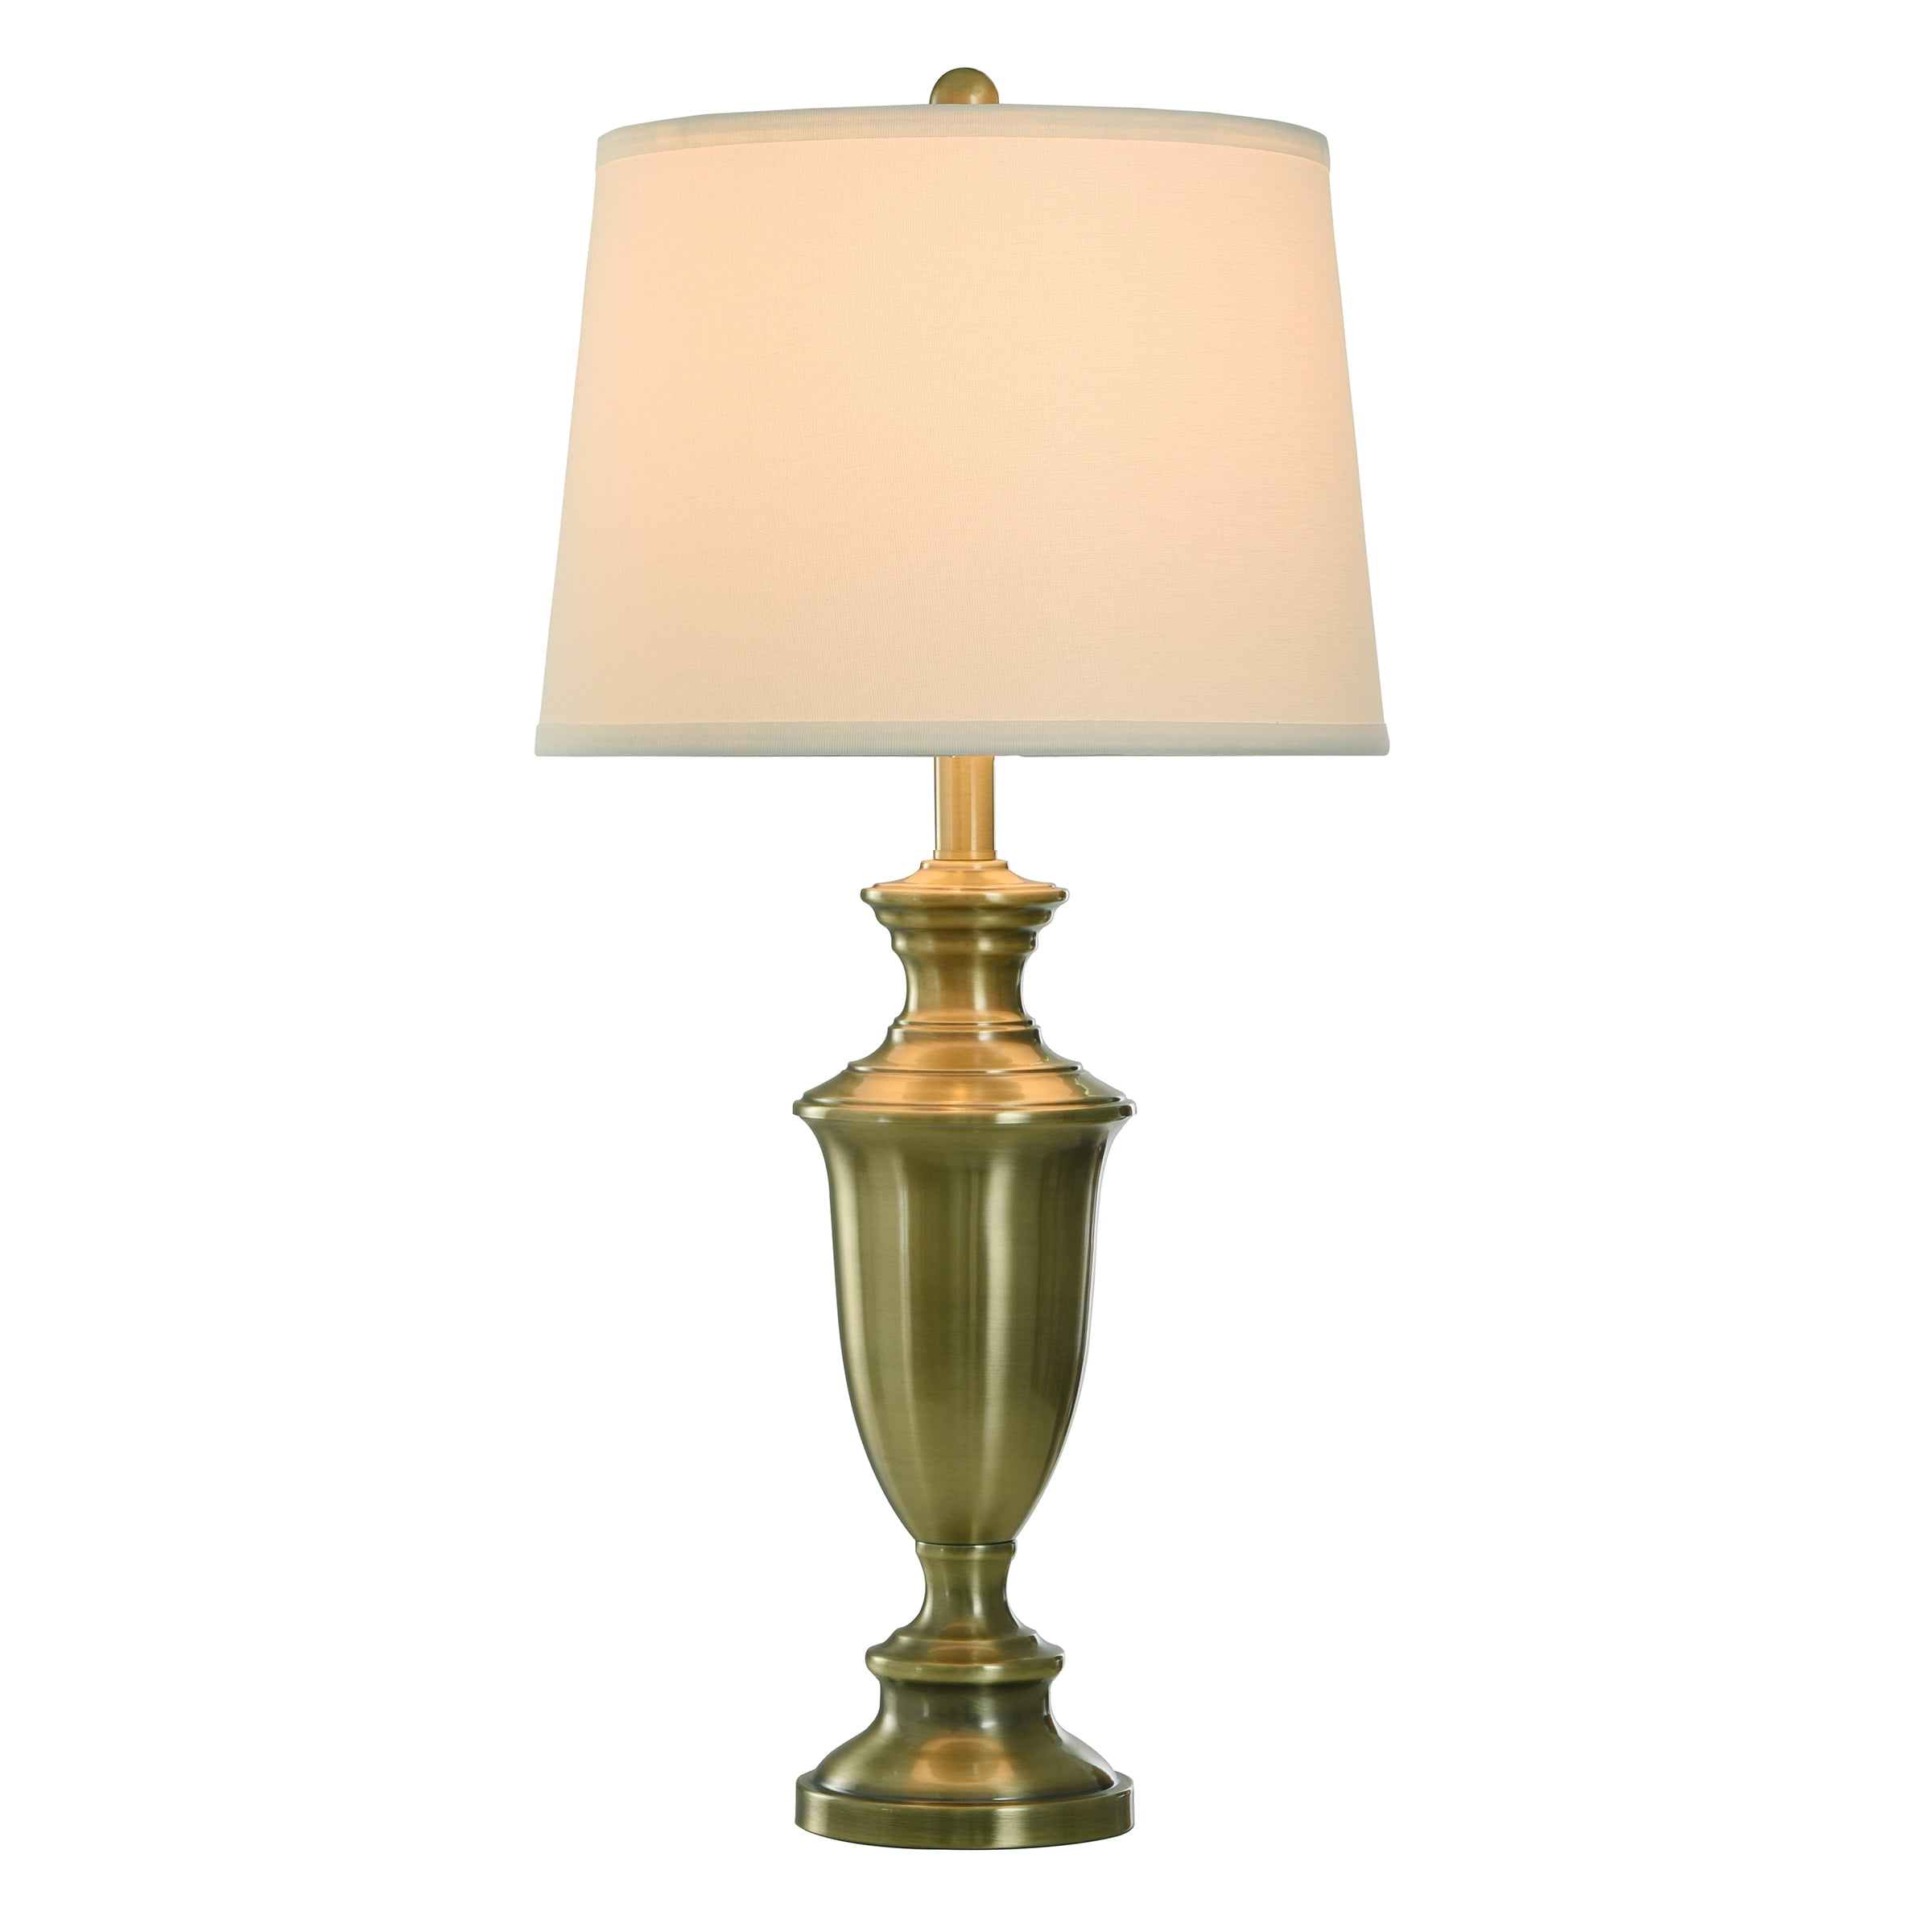 Steel Table Lamp - Antique Brass - Heavy White Shade 